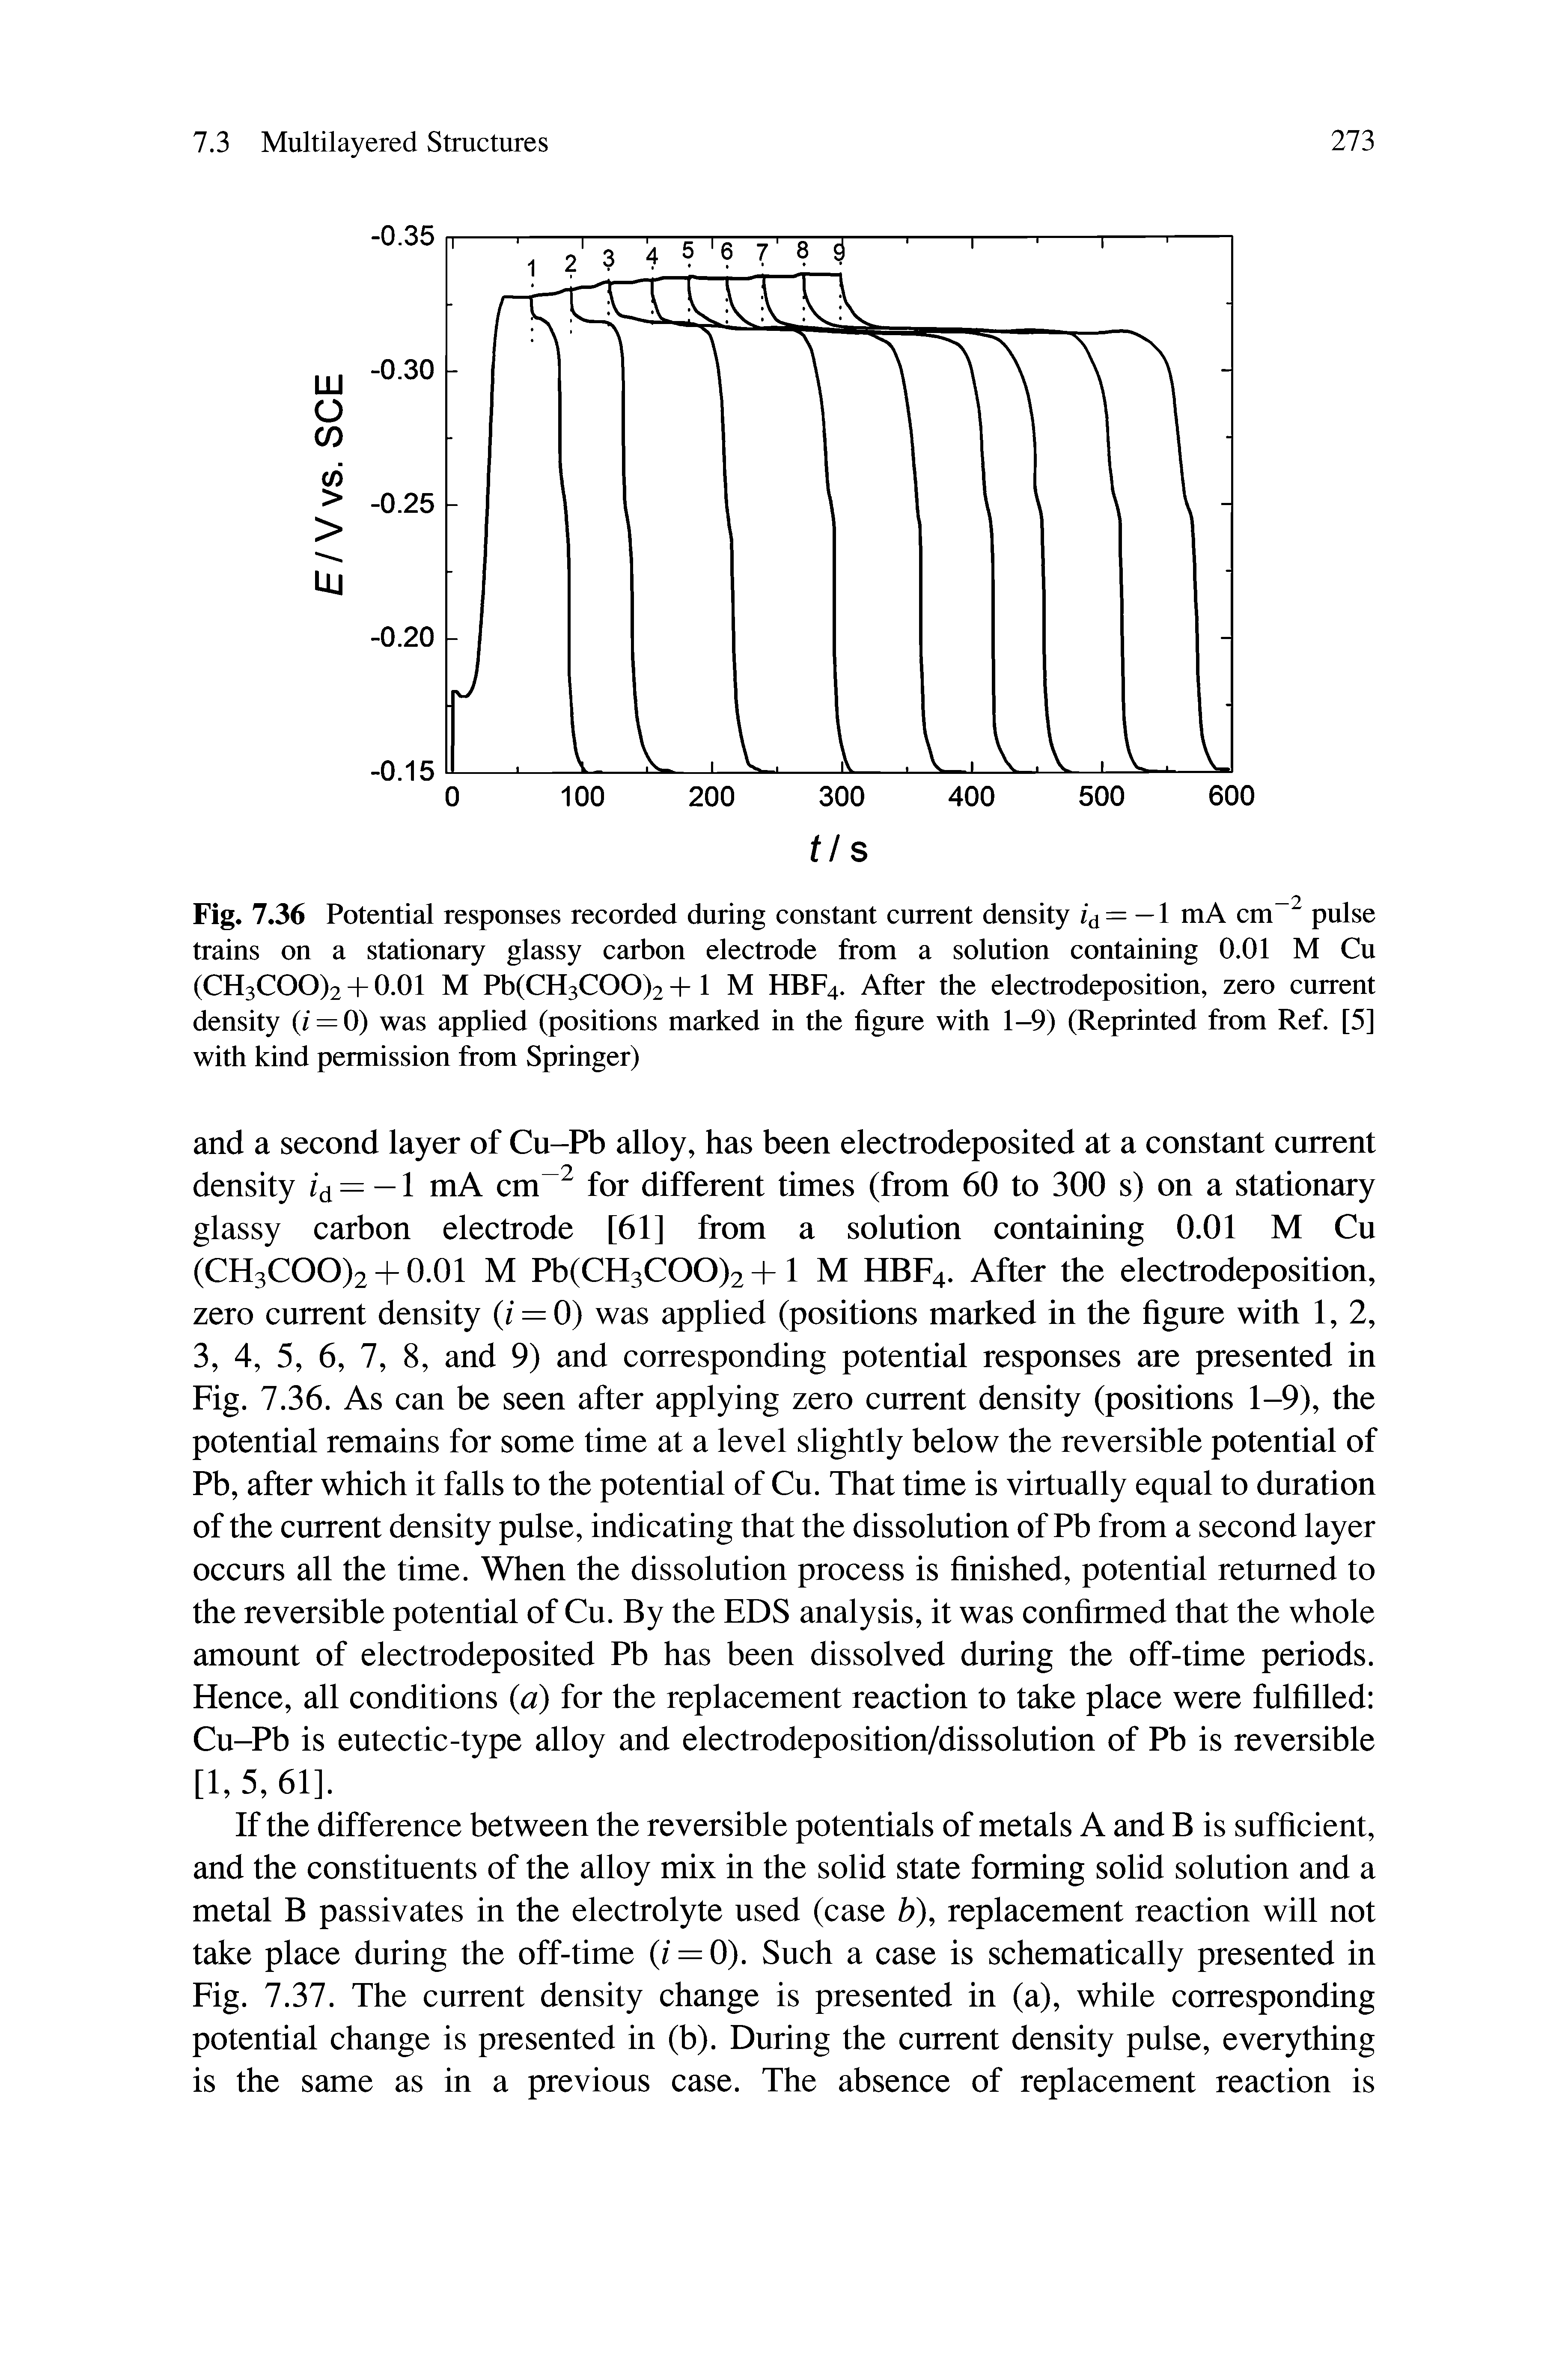 Fig. 7.36 Potential responses recorded during constant current density = mA cm pulse trains on a stationary glassy carbon electrode from a solution containing 0.01 M Cu (CH3COO)2 + 0.01 M Pb(CH3COO)2 +1 M HBF4. After the electrodeposition, zero current density (/ = 0) was applied (positions marked in the figure with 1-9) (Reprinted from Ref. [5] with kind permission from Springer)...